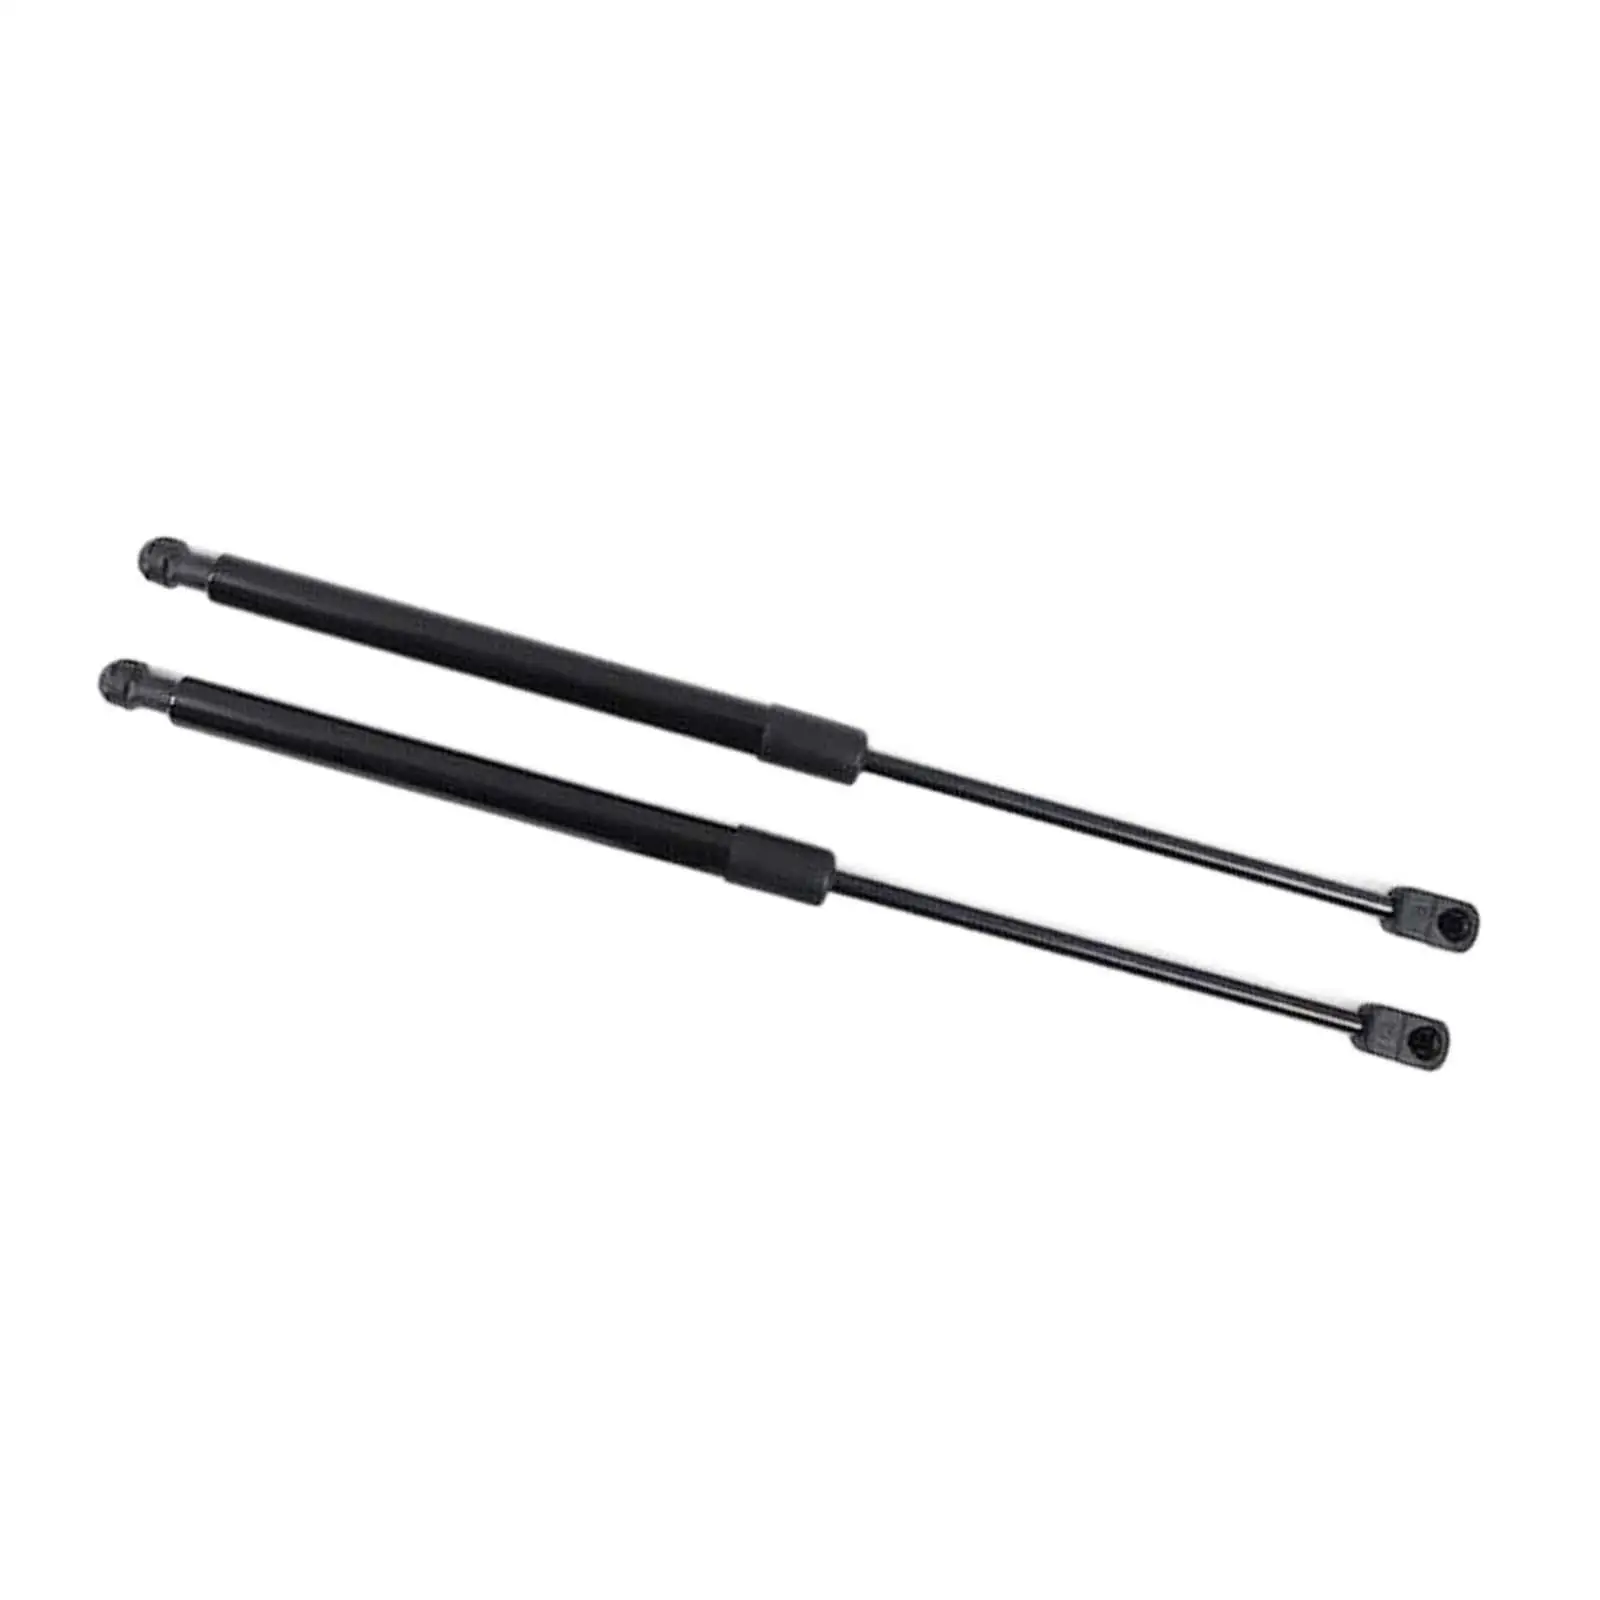 Professional Front Bonnet Struts Durable 25inch Vehicle Hood Lift Support Shocks Holder for Byd Atto 3 Replaces Accessory